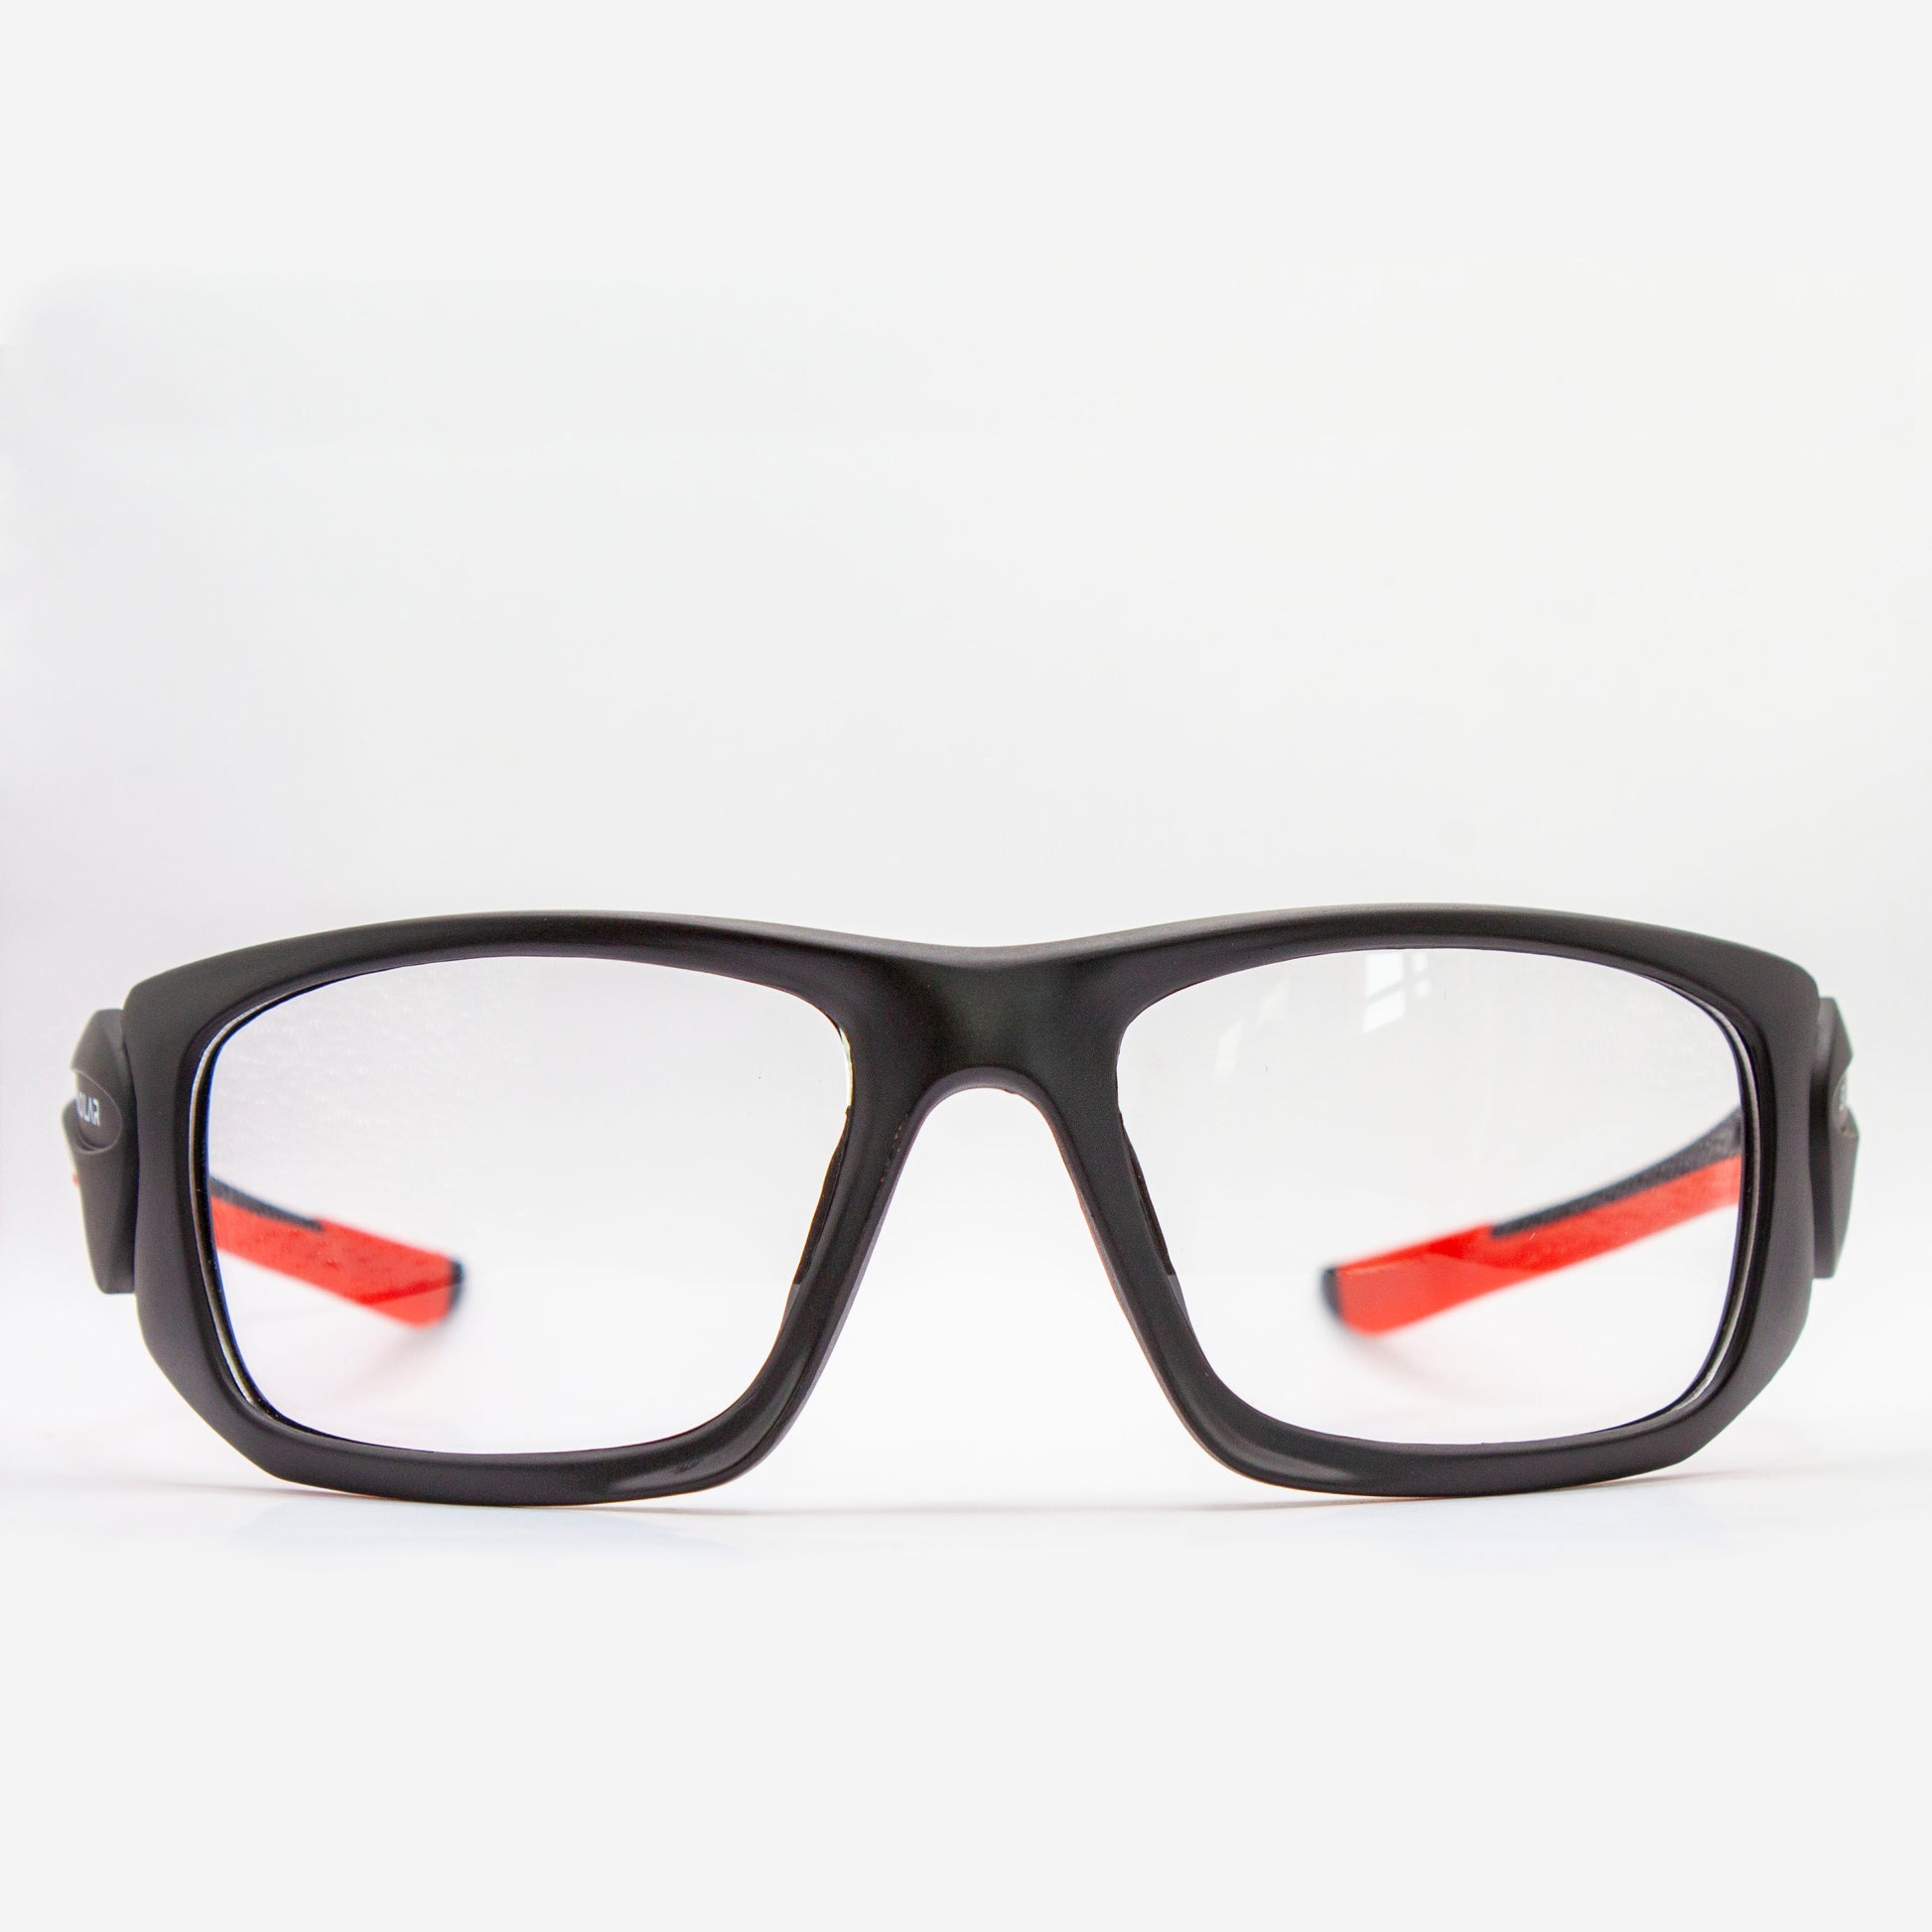 Raybeams photochromic mountain bike glasses - front view